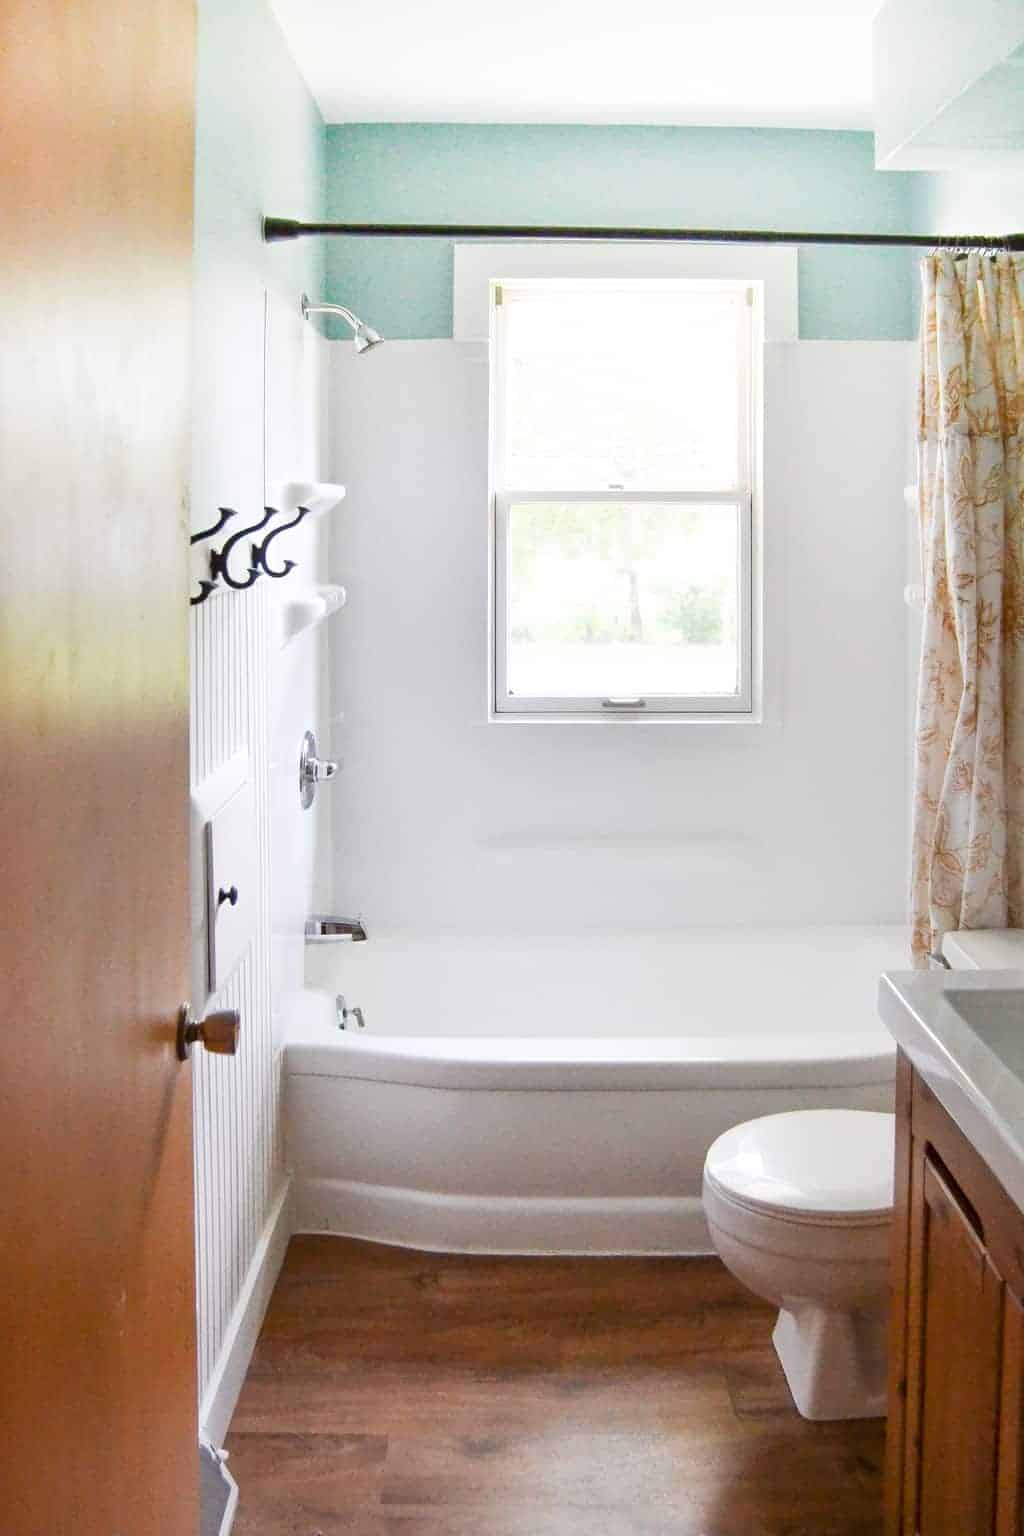 Bathroom Makeover - You don't need a lot of money to make over your bathroom. This bathroom makeover from My Creative Days shows you ways to bring your old bathroom up to date, brighter and more fresh on a budget!